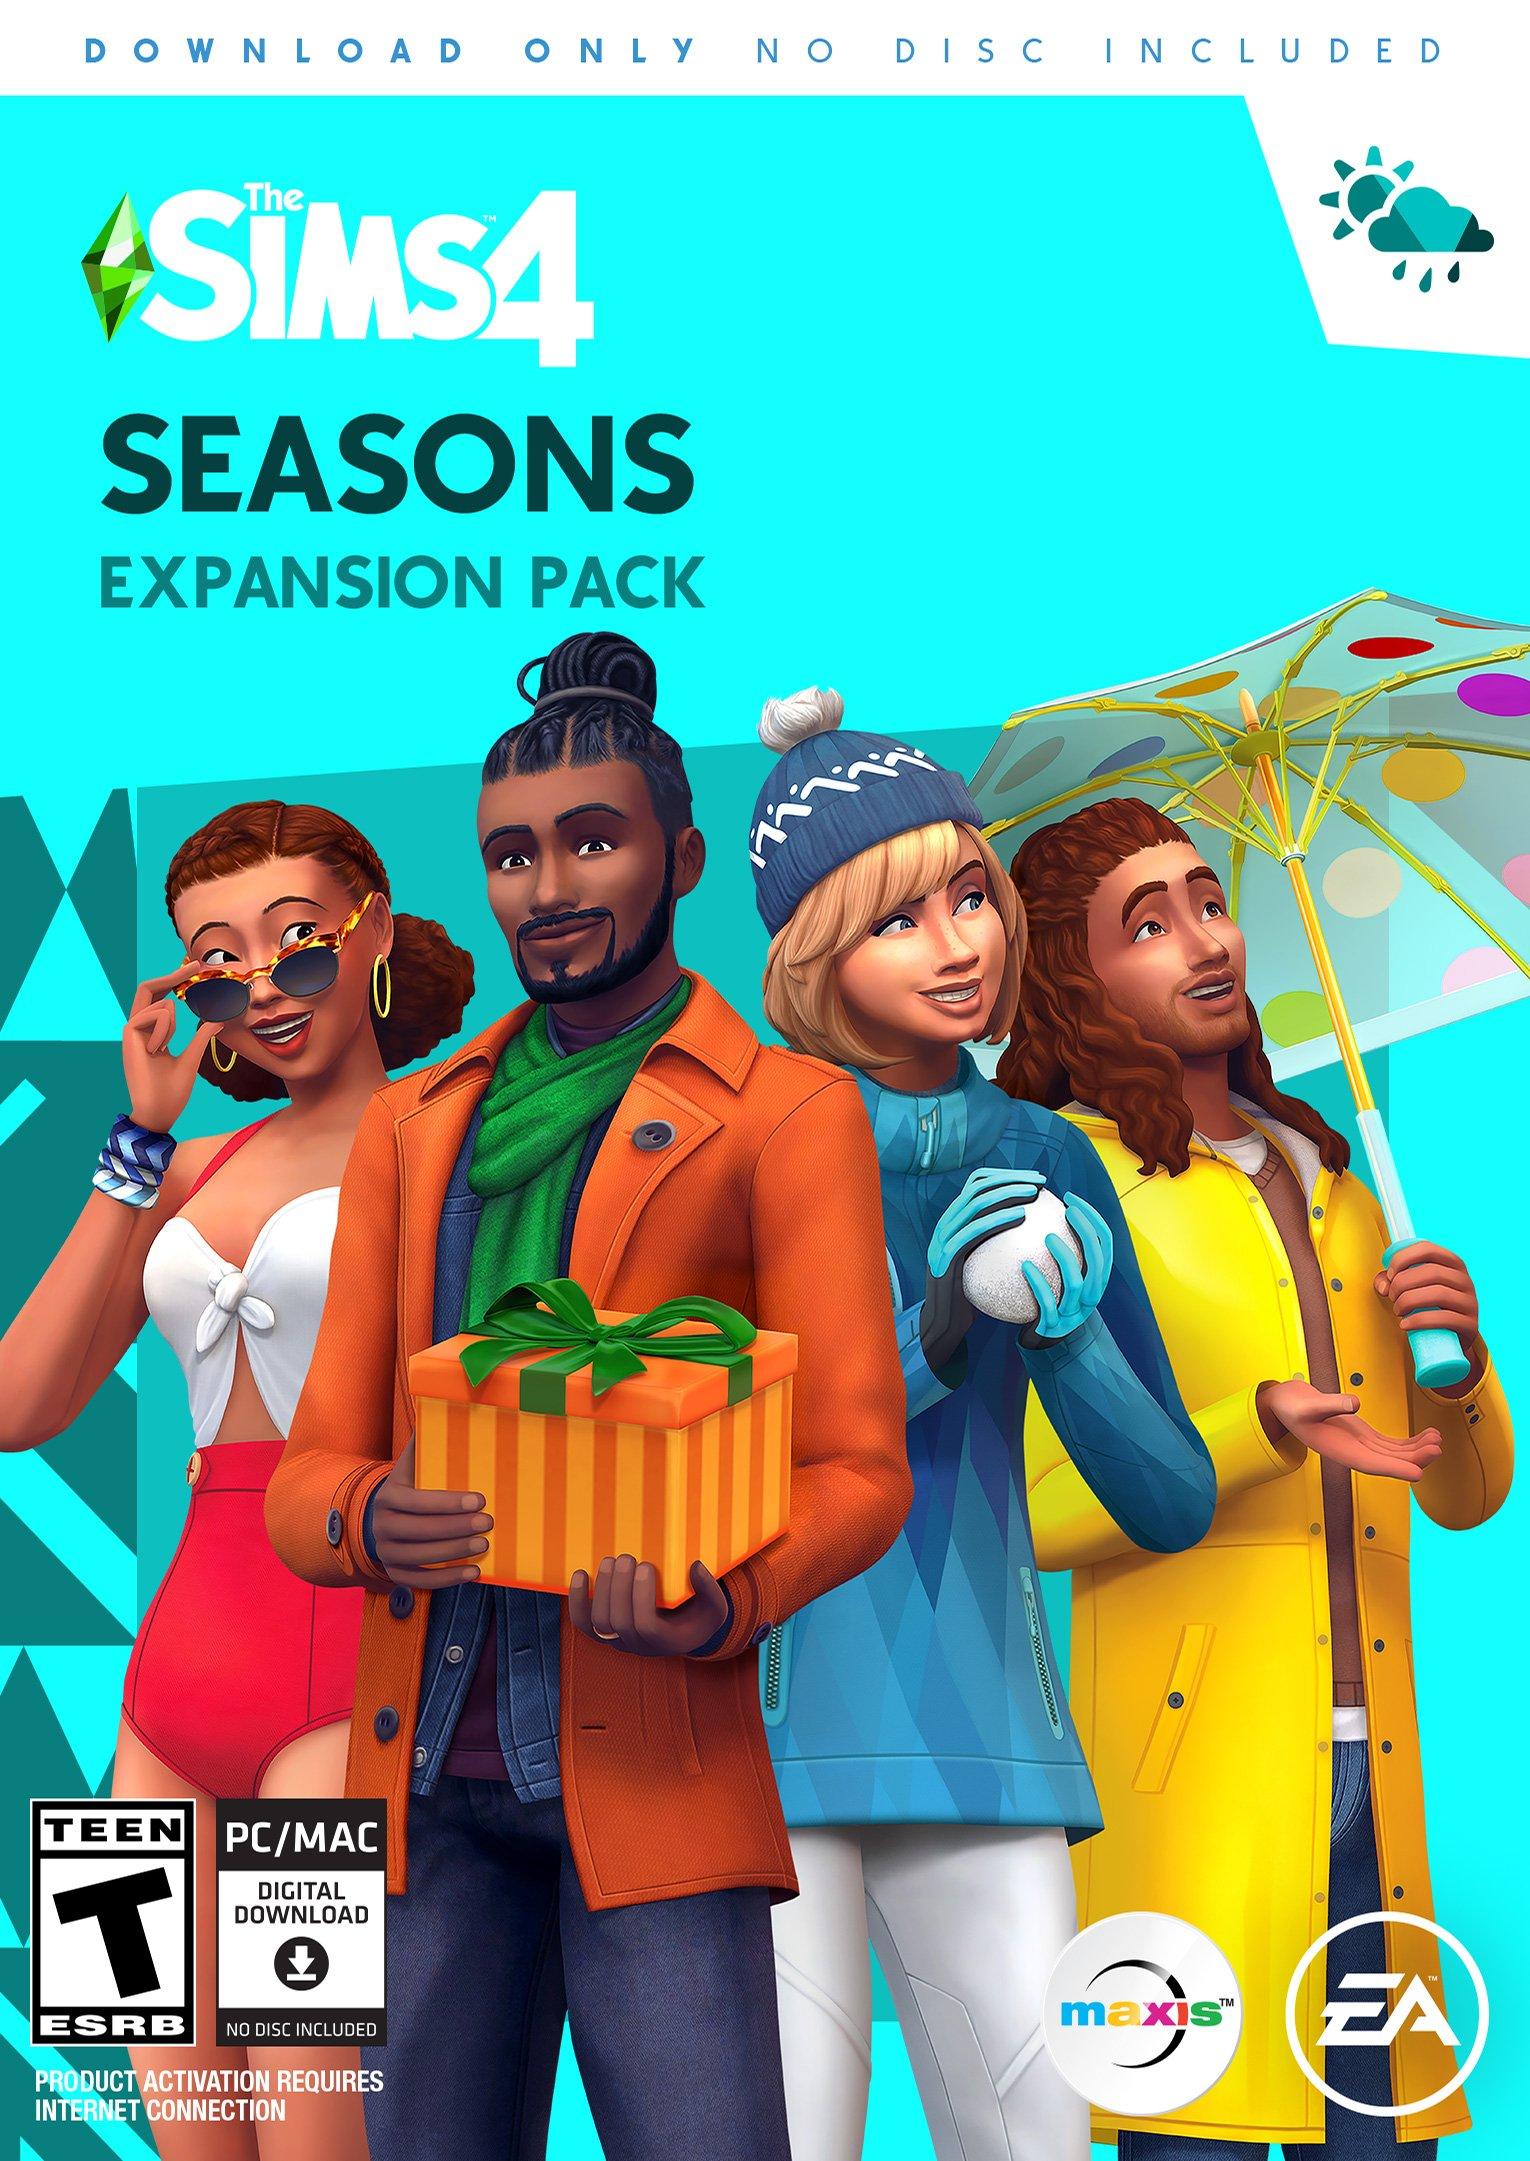 Sims 4 Free to Play celebration sale